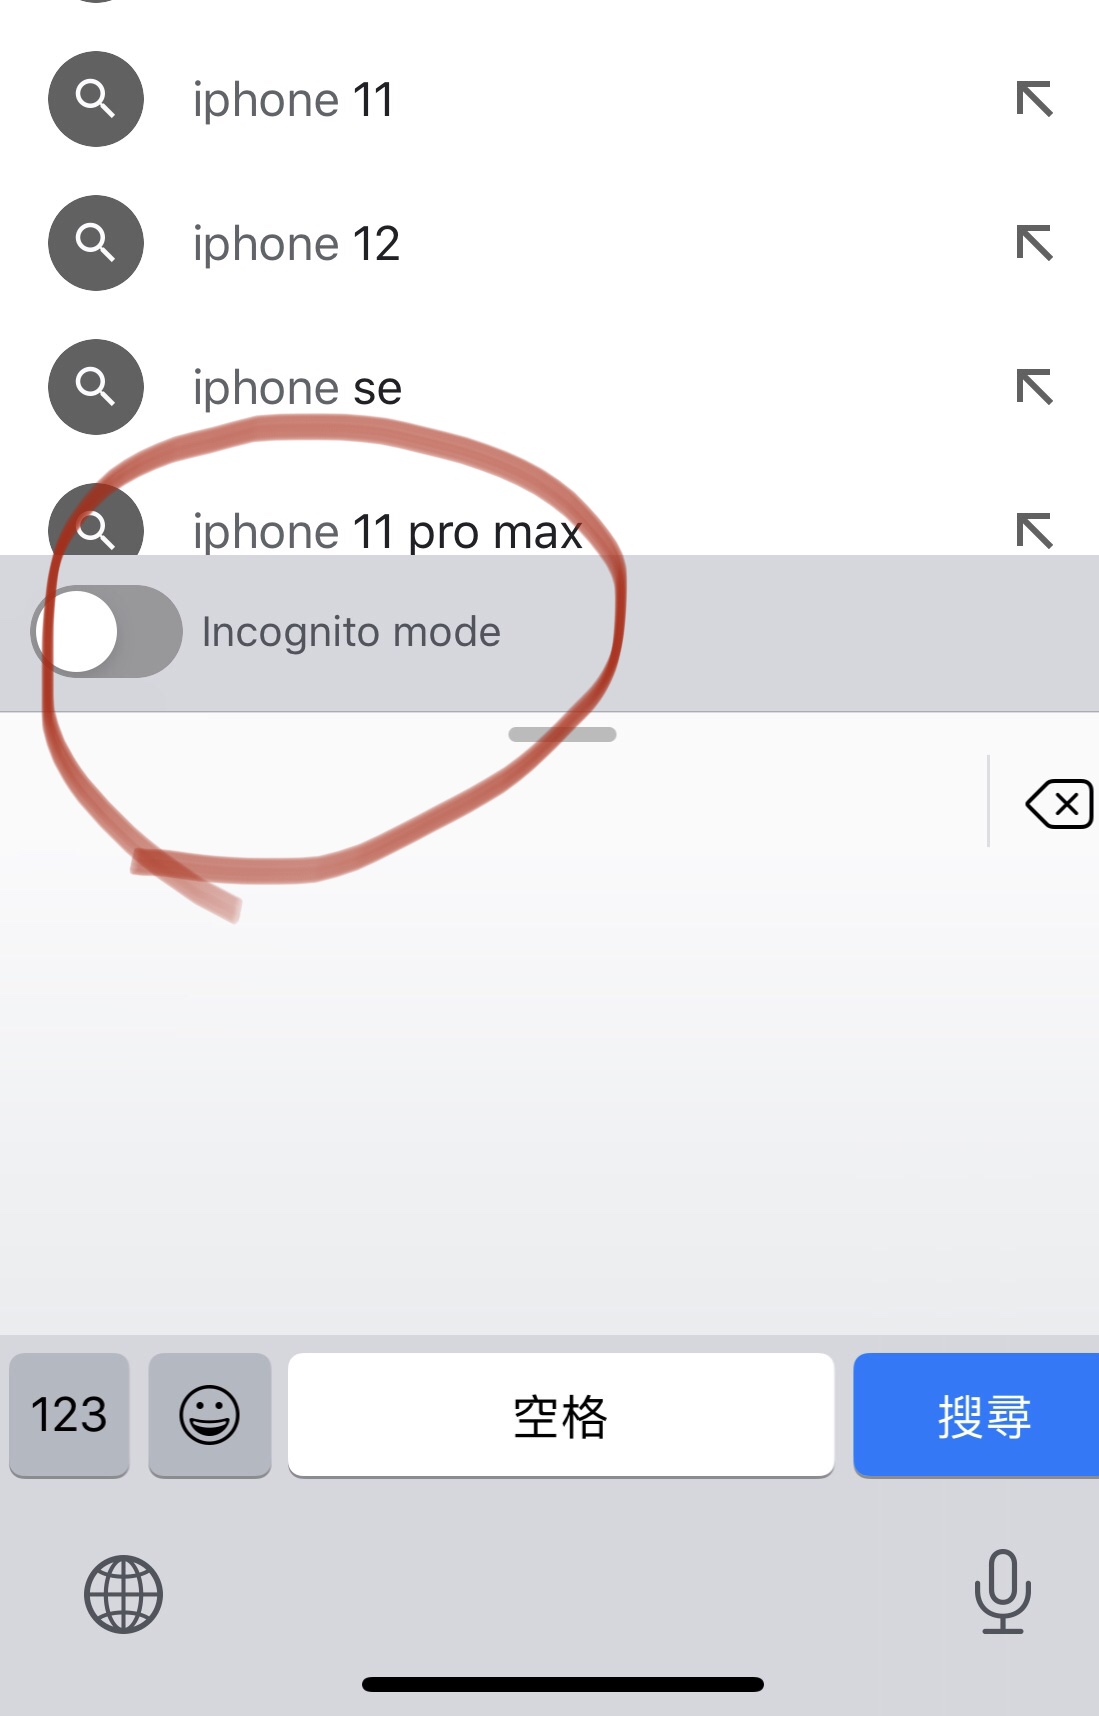 What is incognito mode